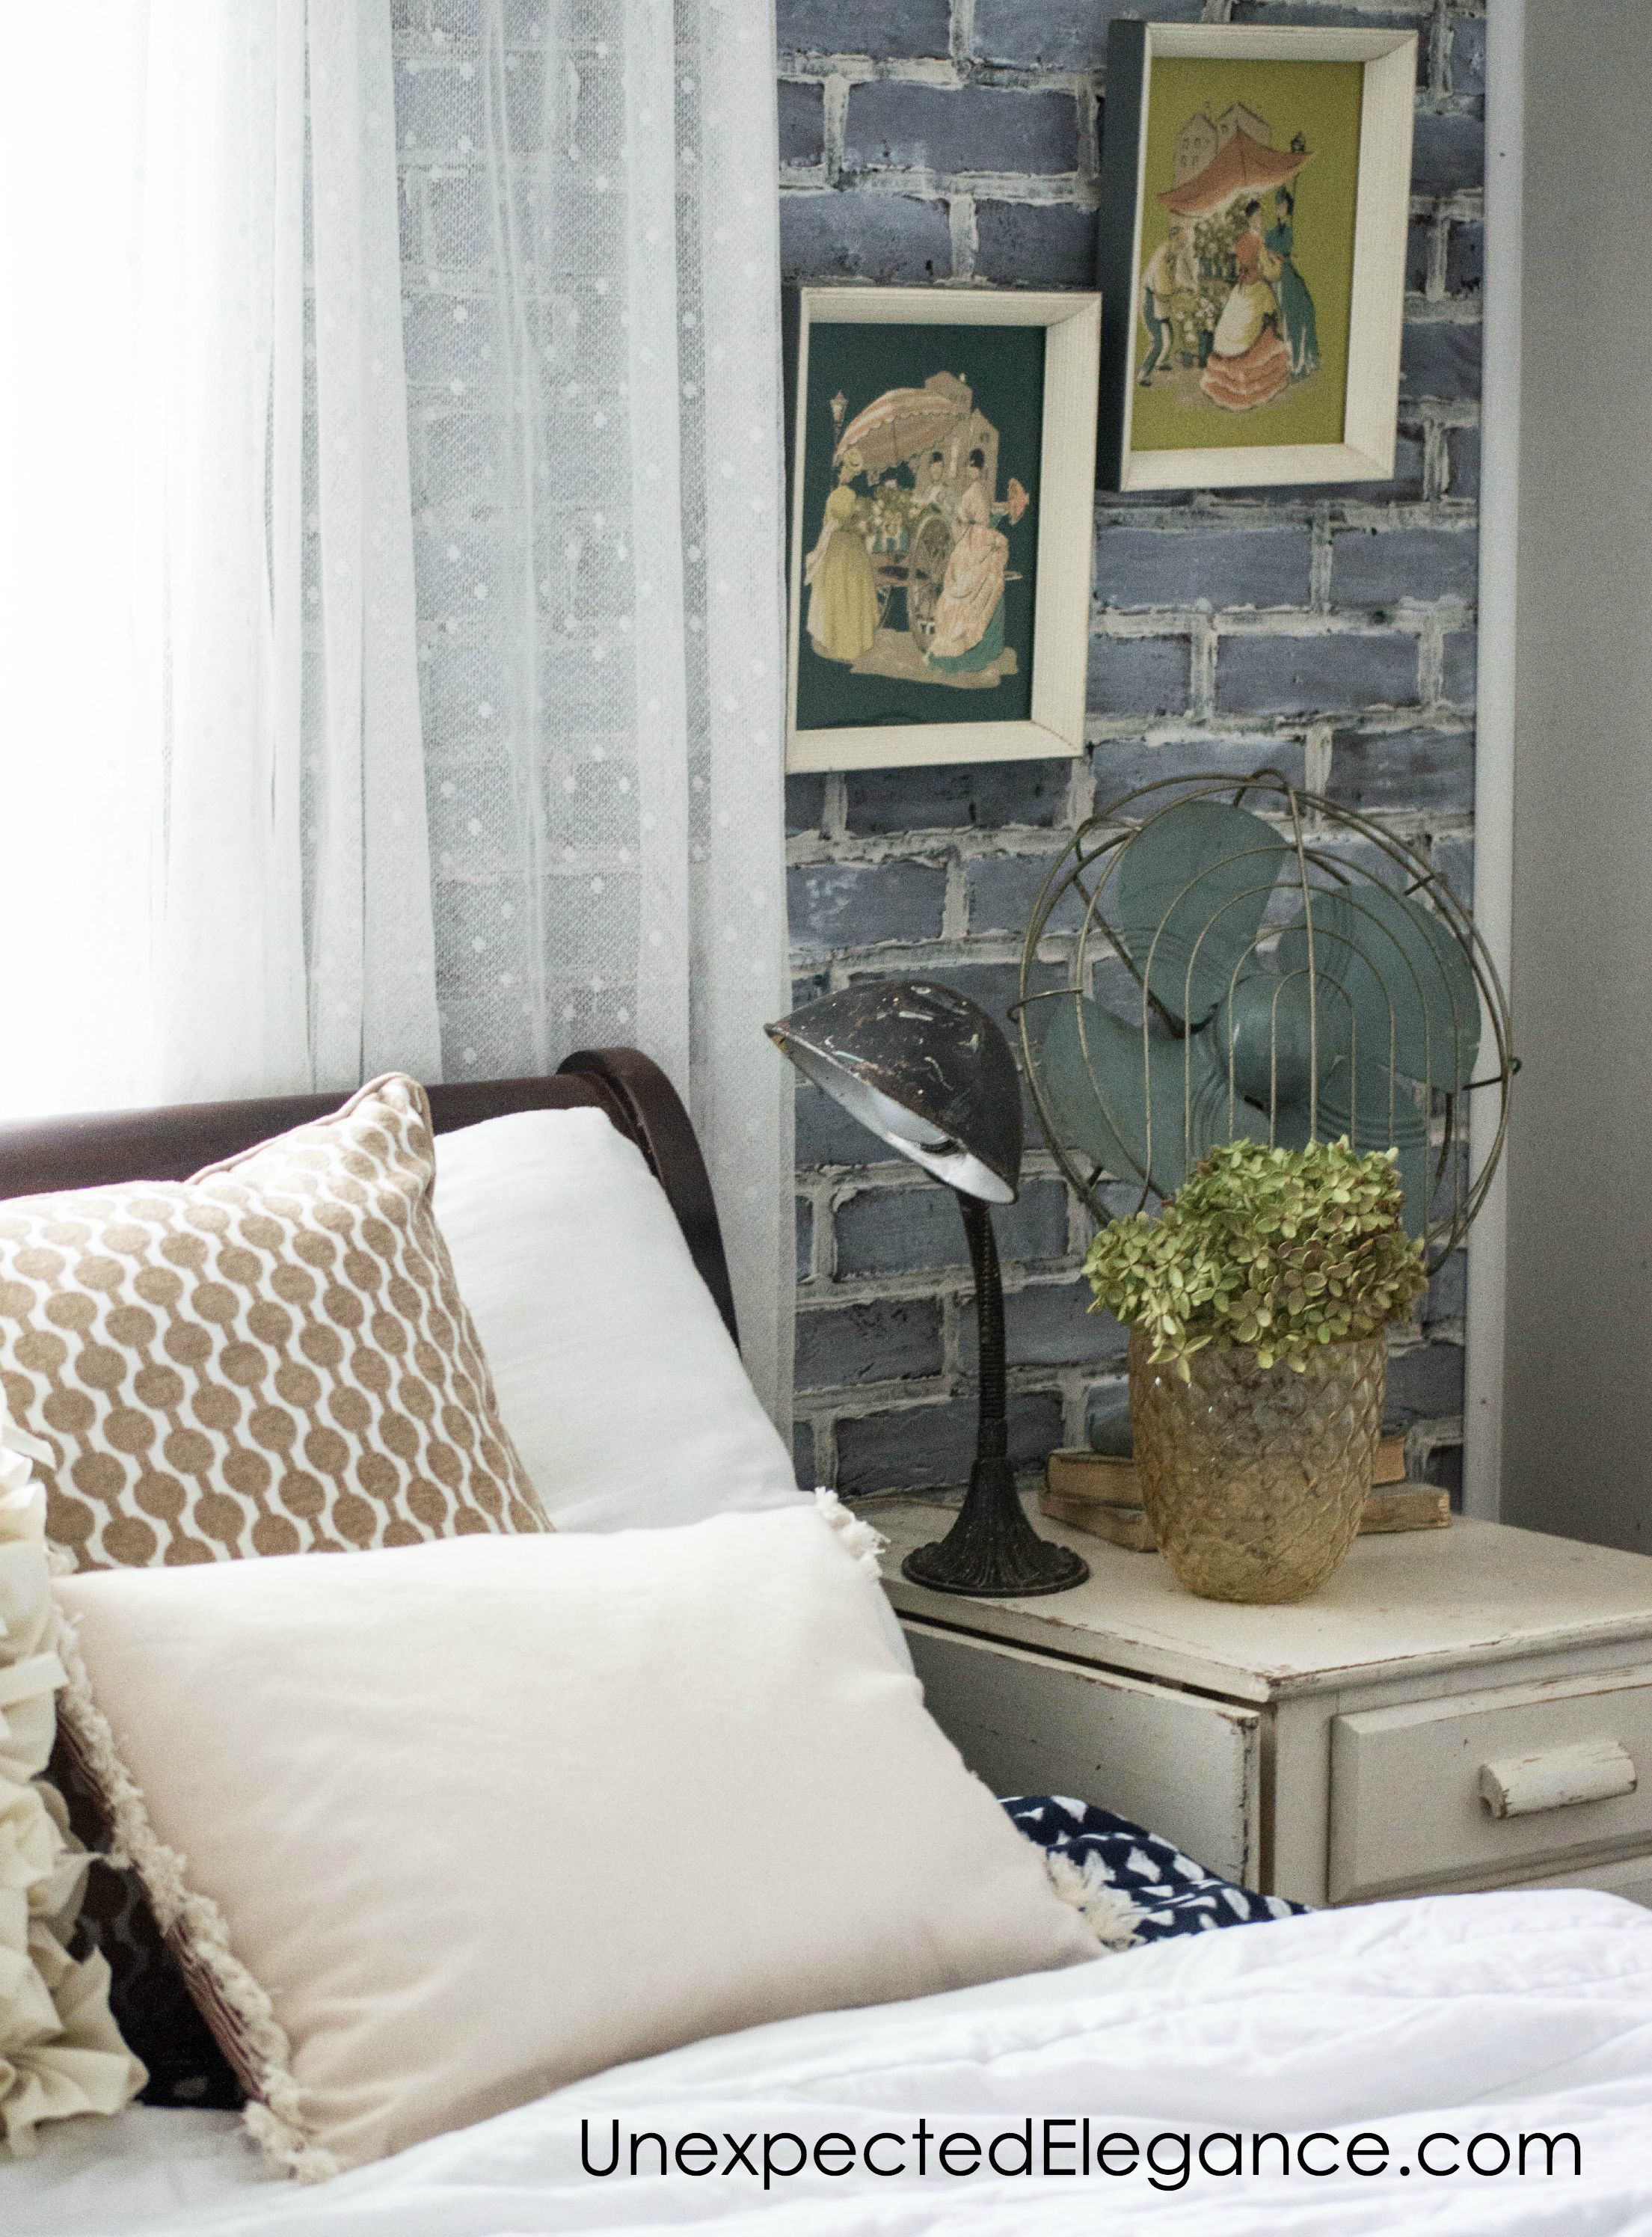 Check out this loft-inspired makeover! A few economical changes to a guest bedroom completely changed the feel.